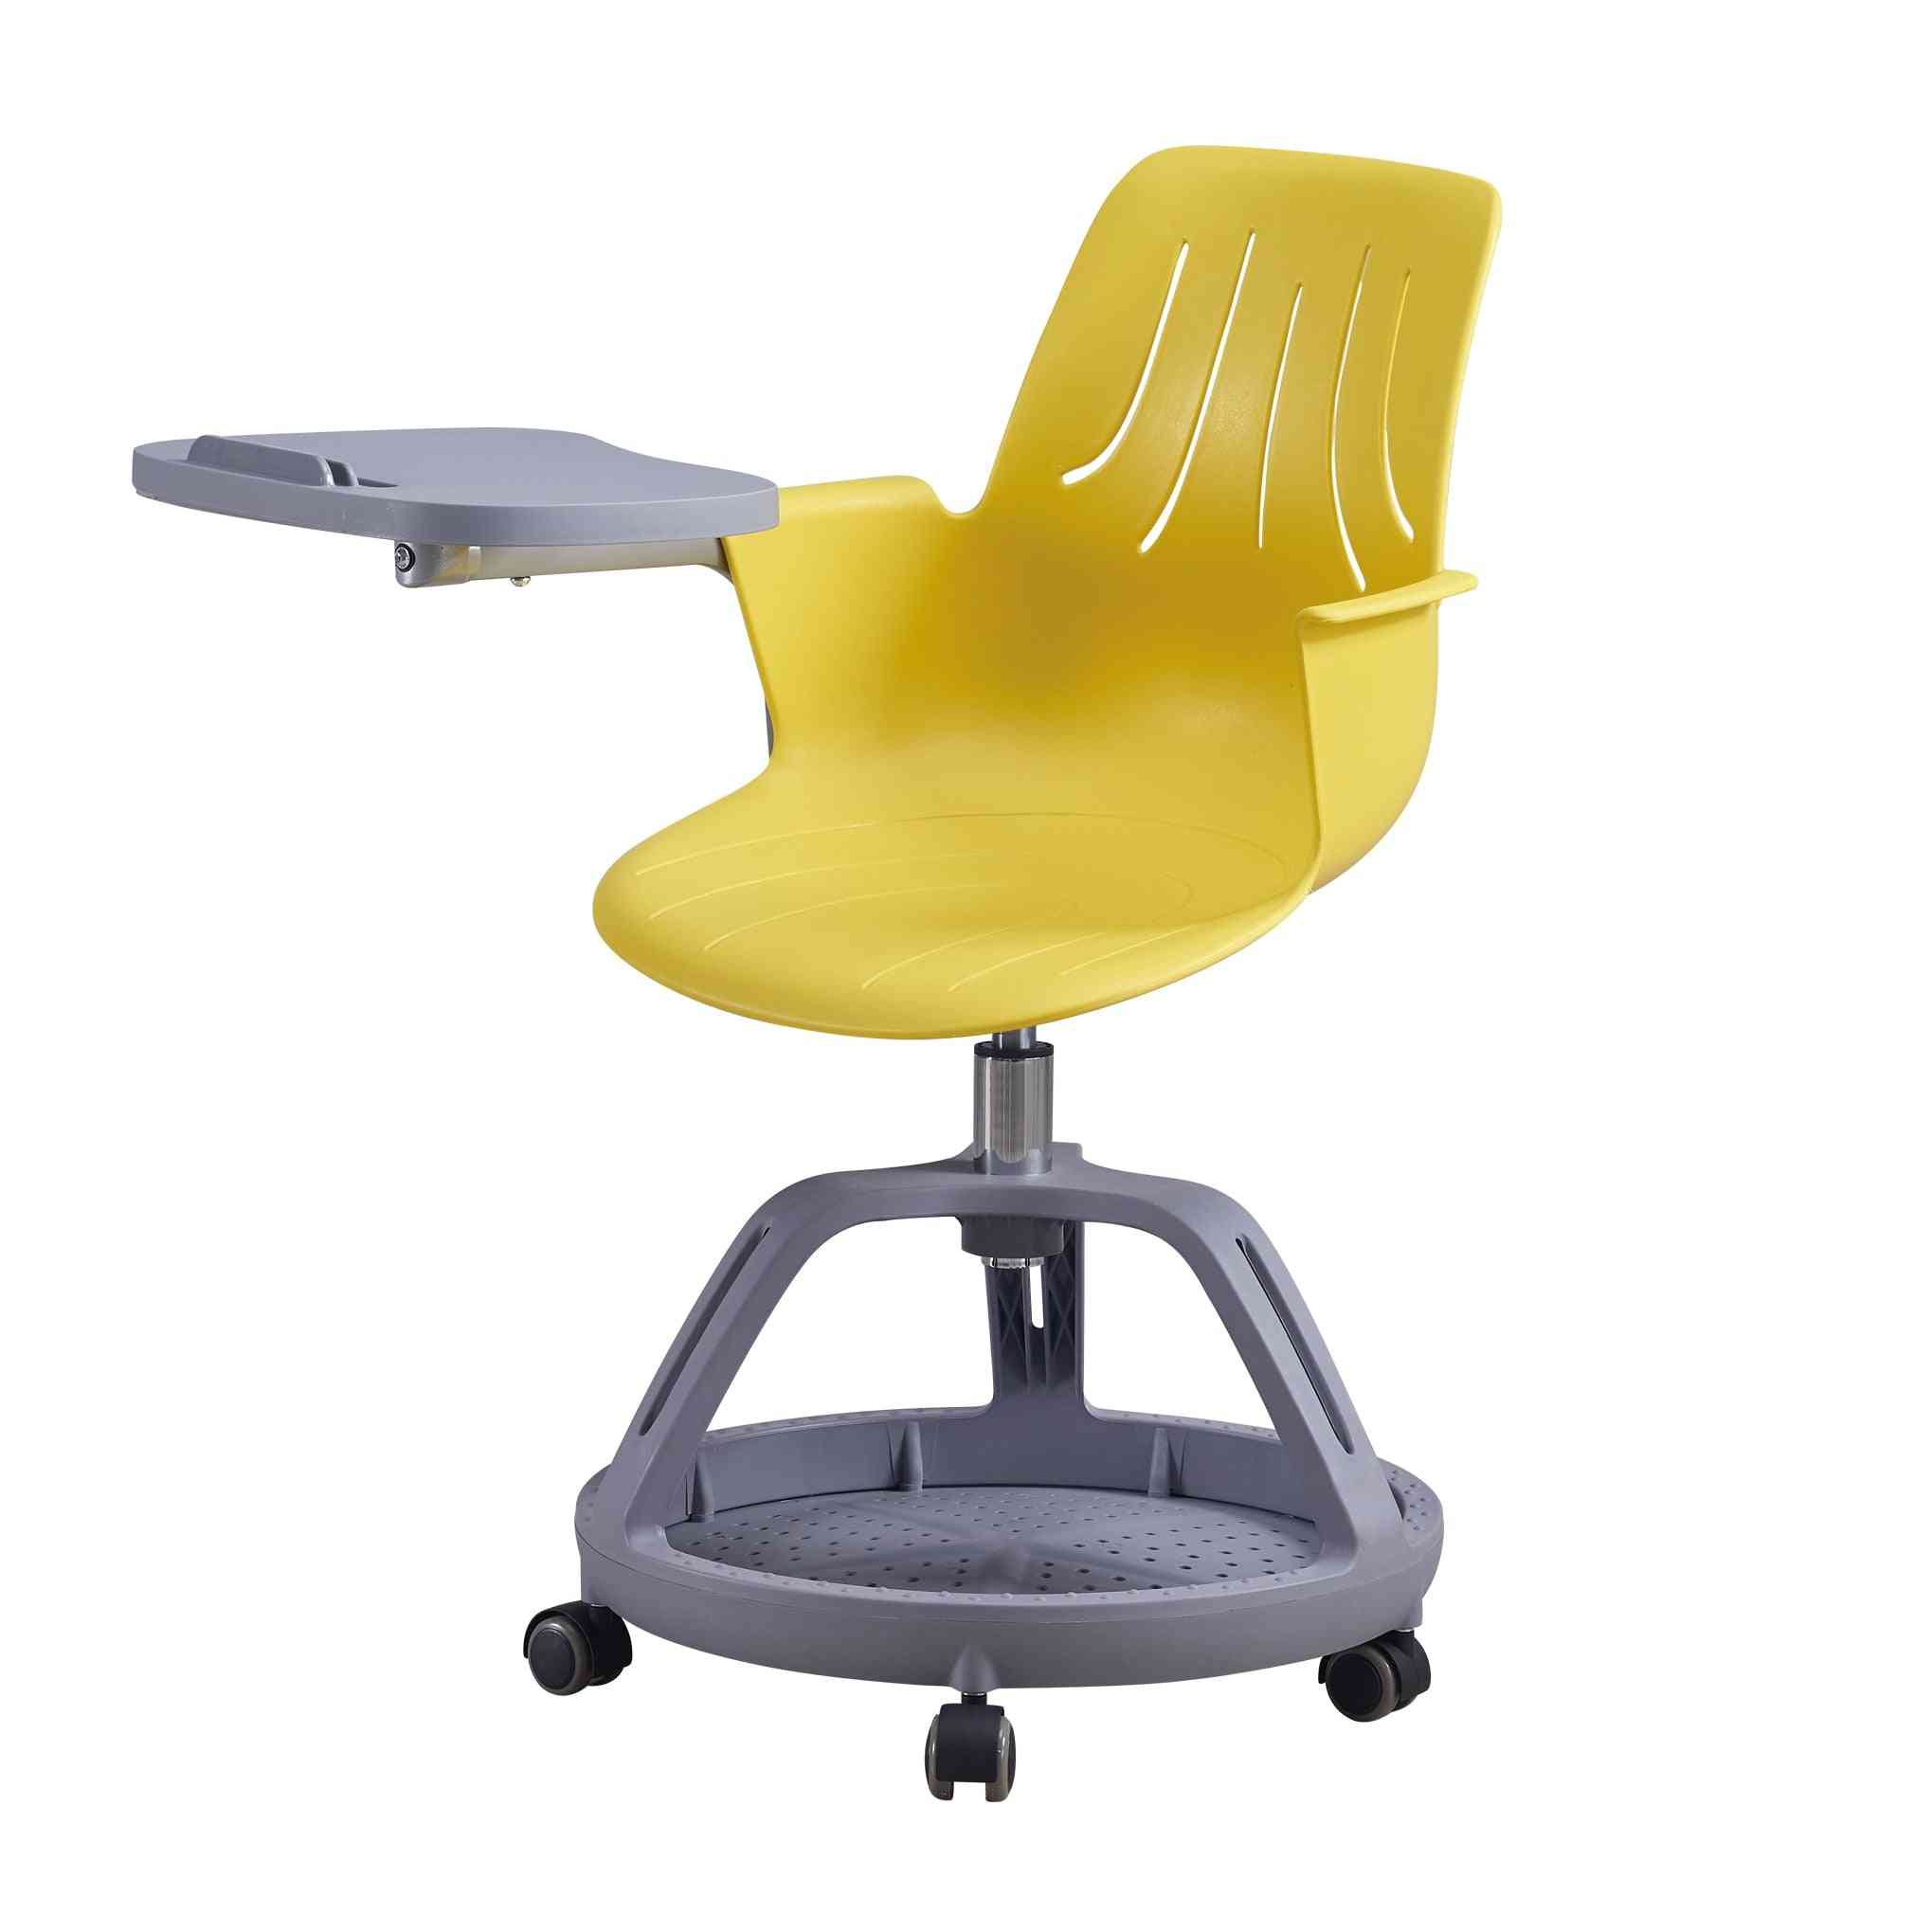 Student Chairs With Round Base & Wheels